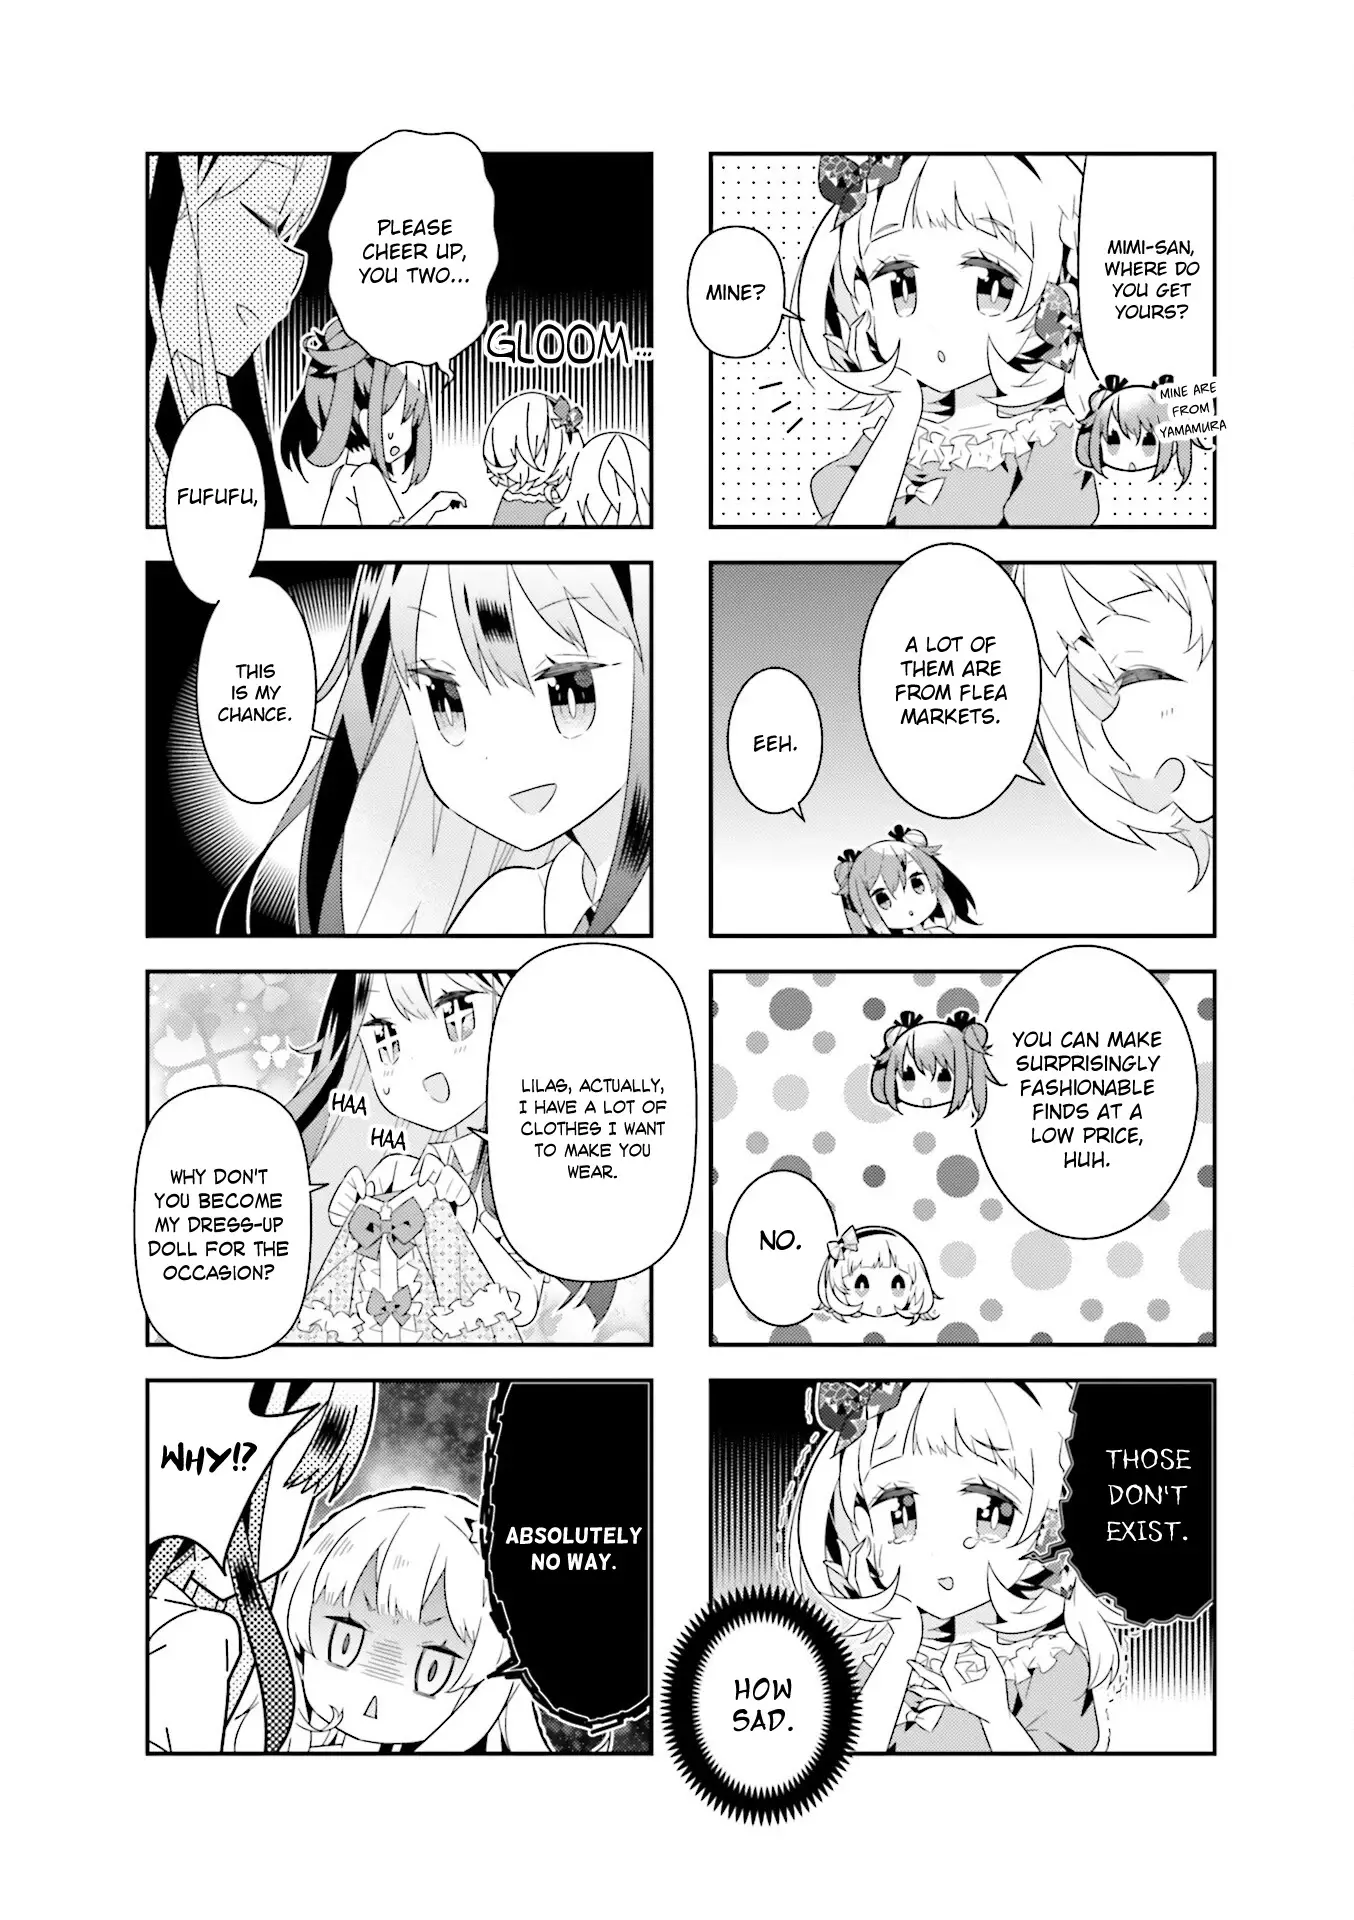 The Life After Retirement Of Magical Girls - 16 page 4-9b1394cb